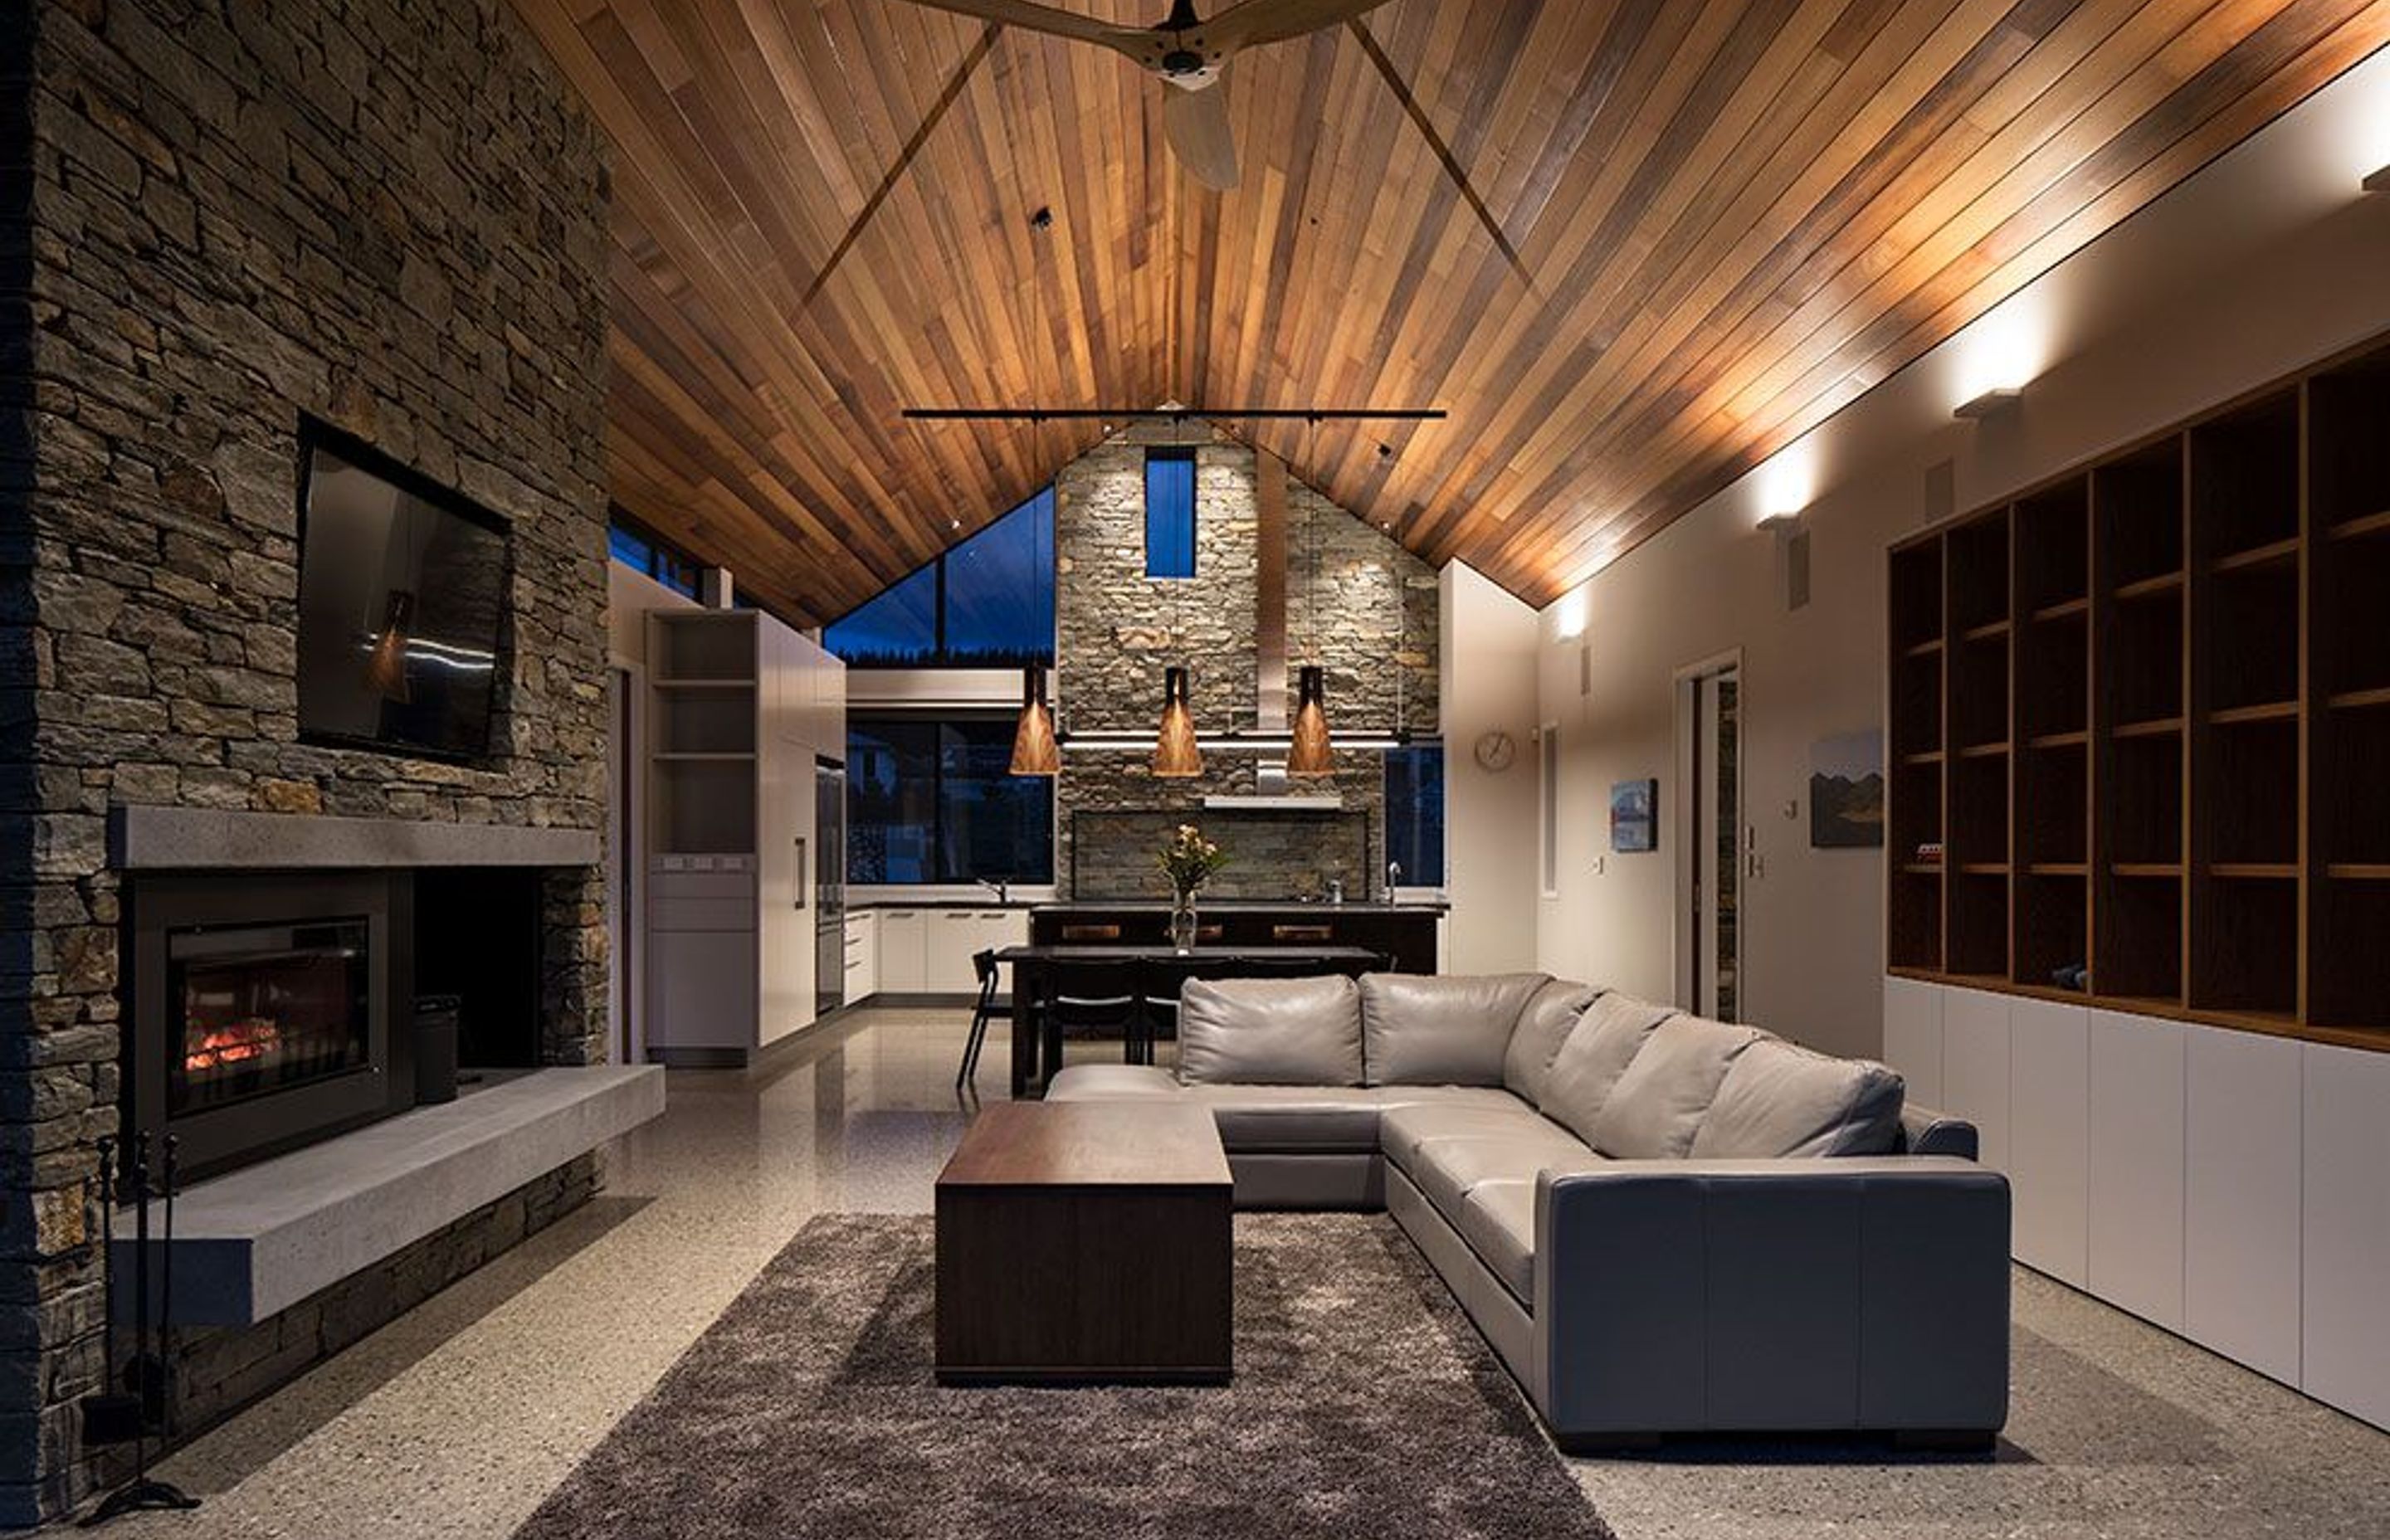 The lofty roof form of the central pavilion accentuates the mountain views and gives a sense of volume to this open-plan living area.